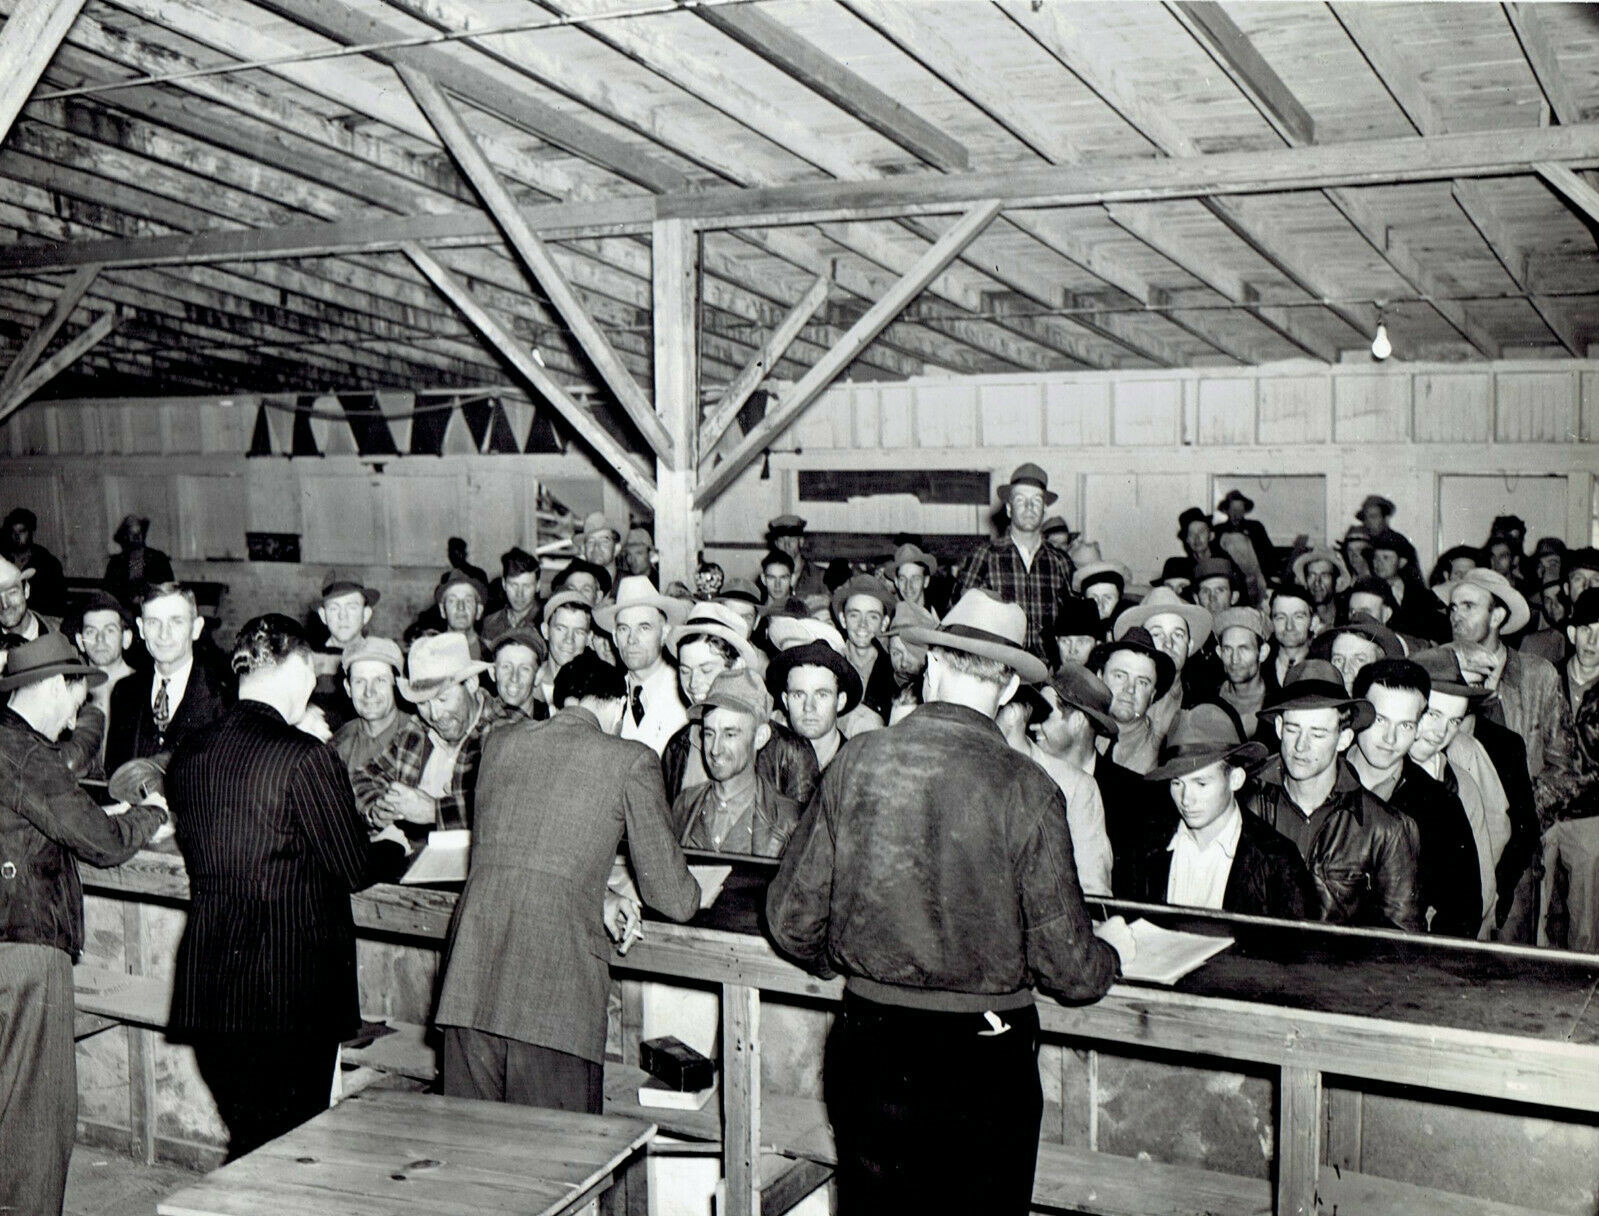 Construction Workers Sign Up To Build Camp Barkeley 1941